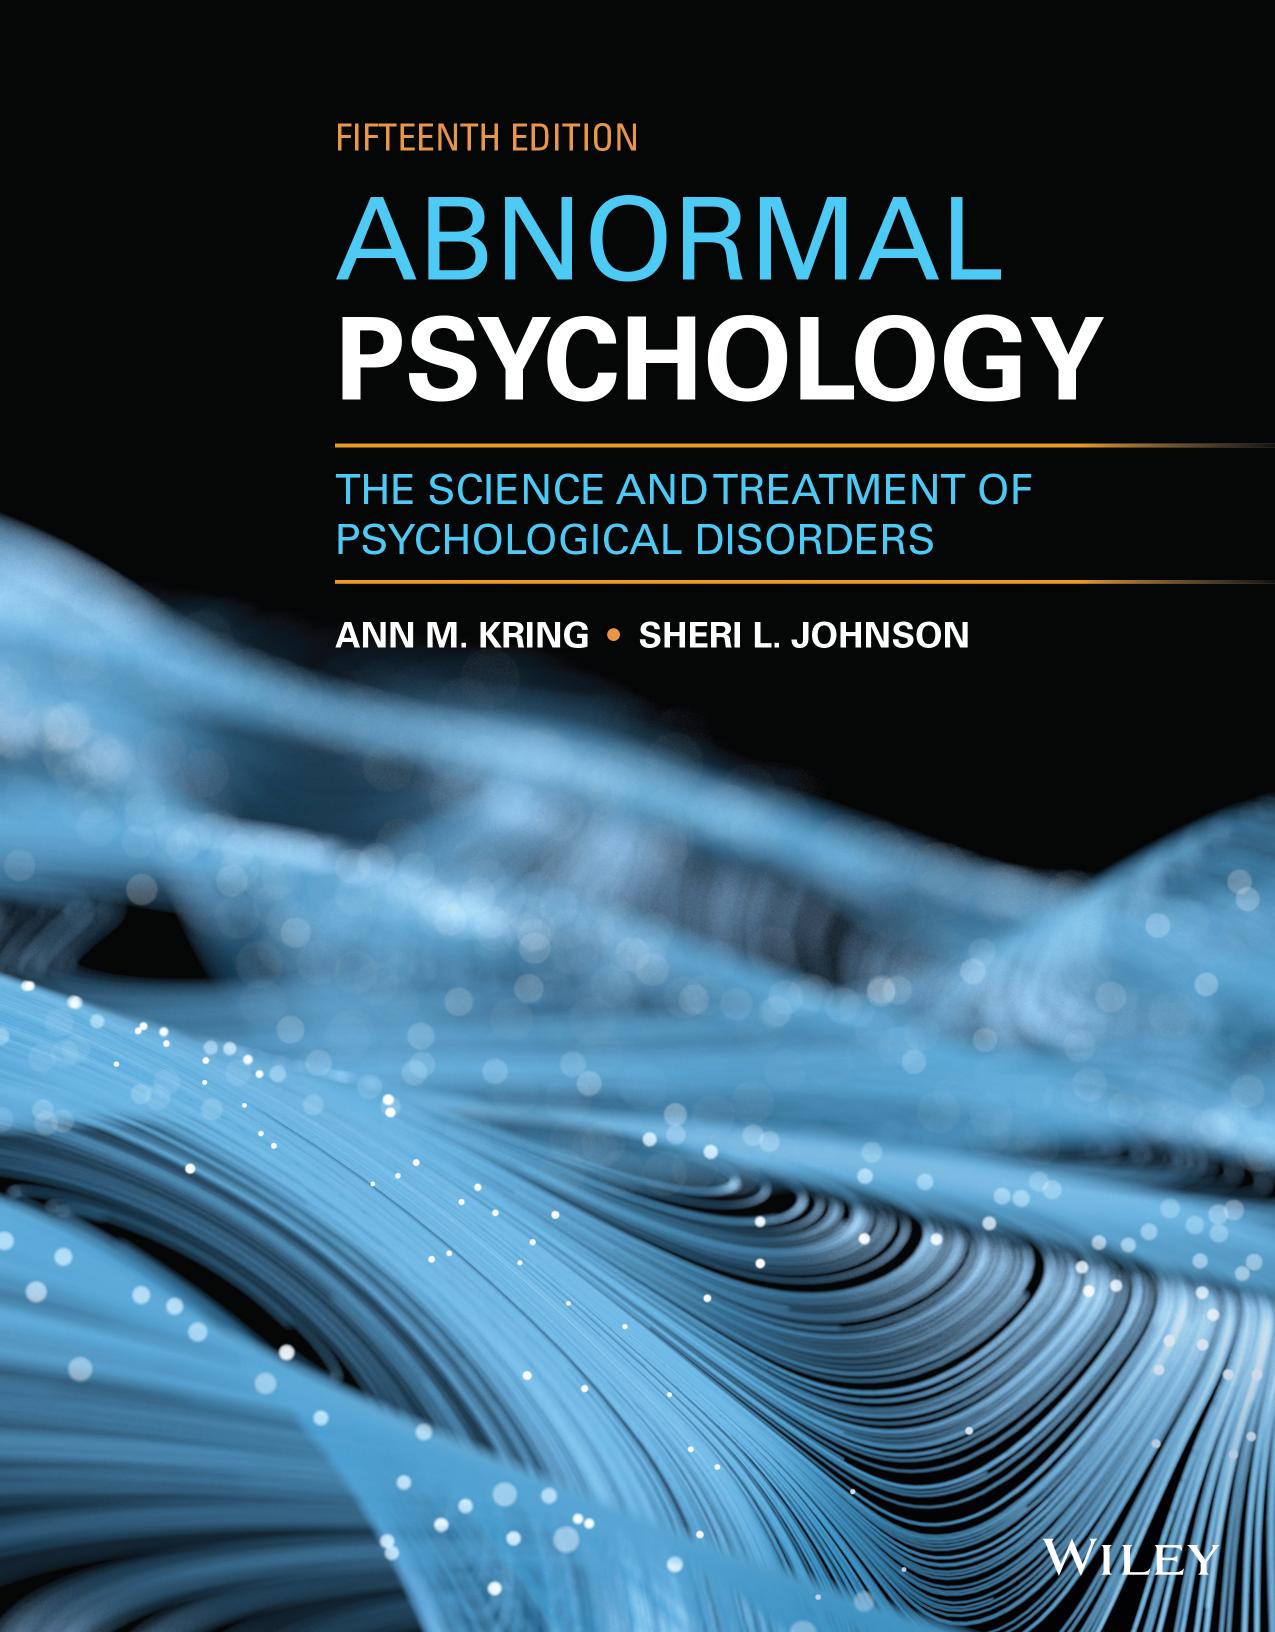 Abnormal Psychology: The Science and Treatment of Psychological Disorders 15th Edition by  Ann M. Kring , Sheri L. Johnson 